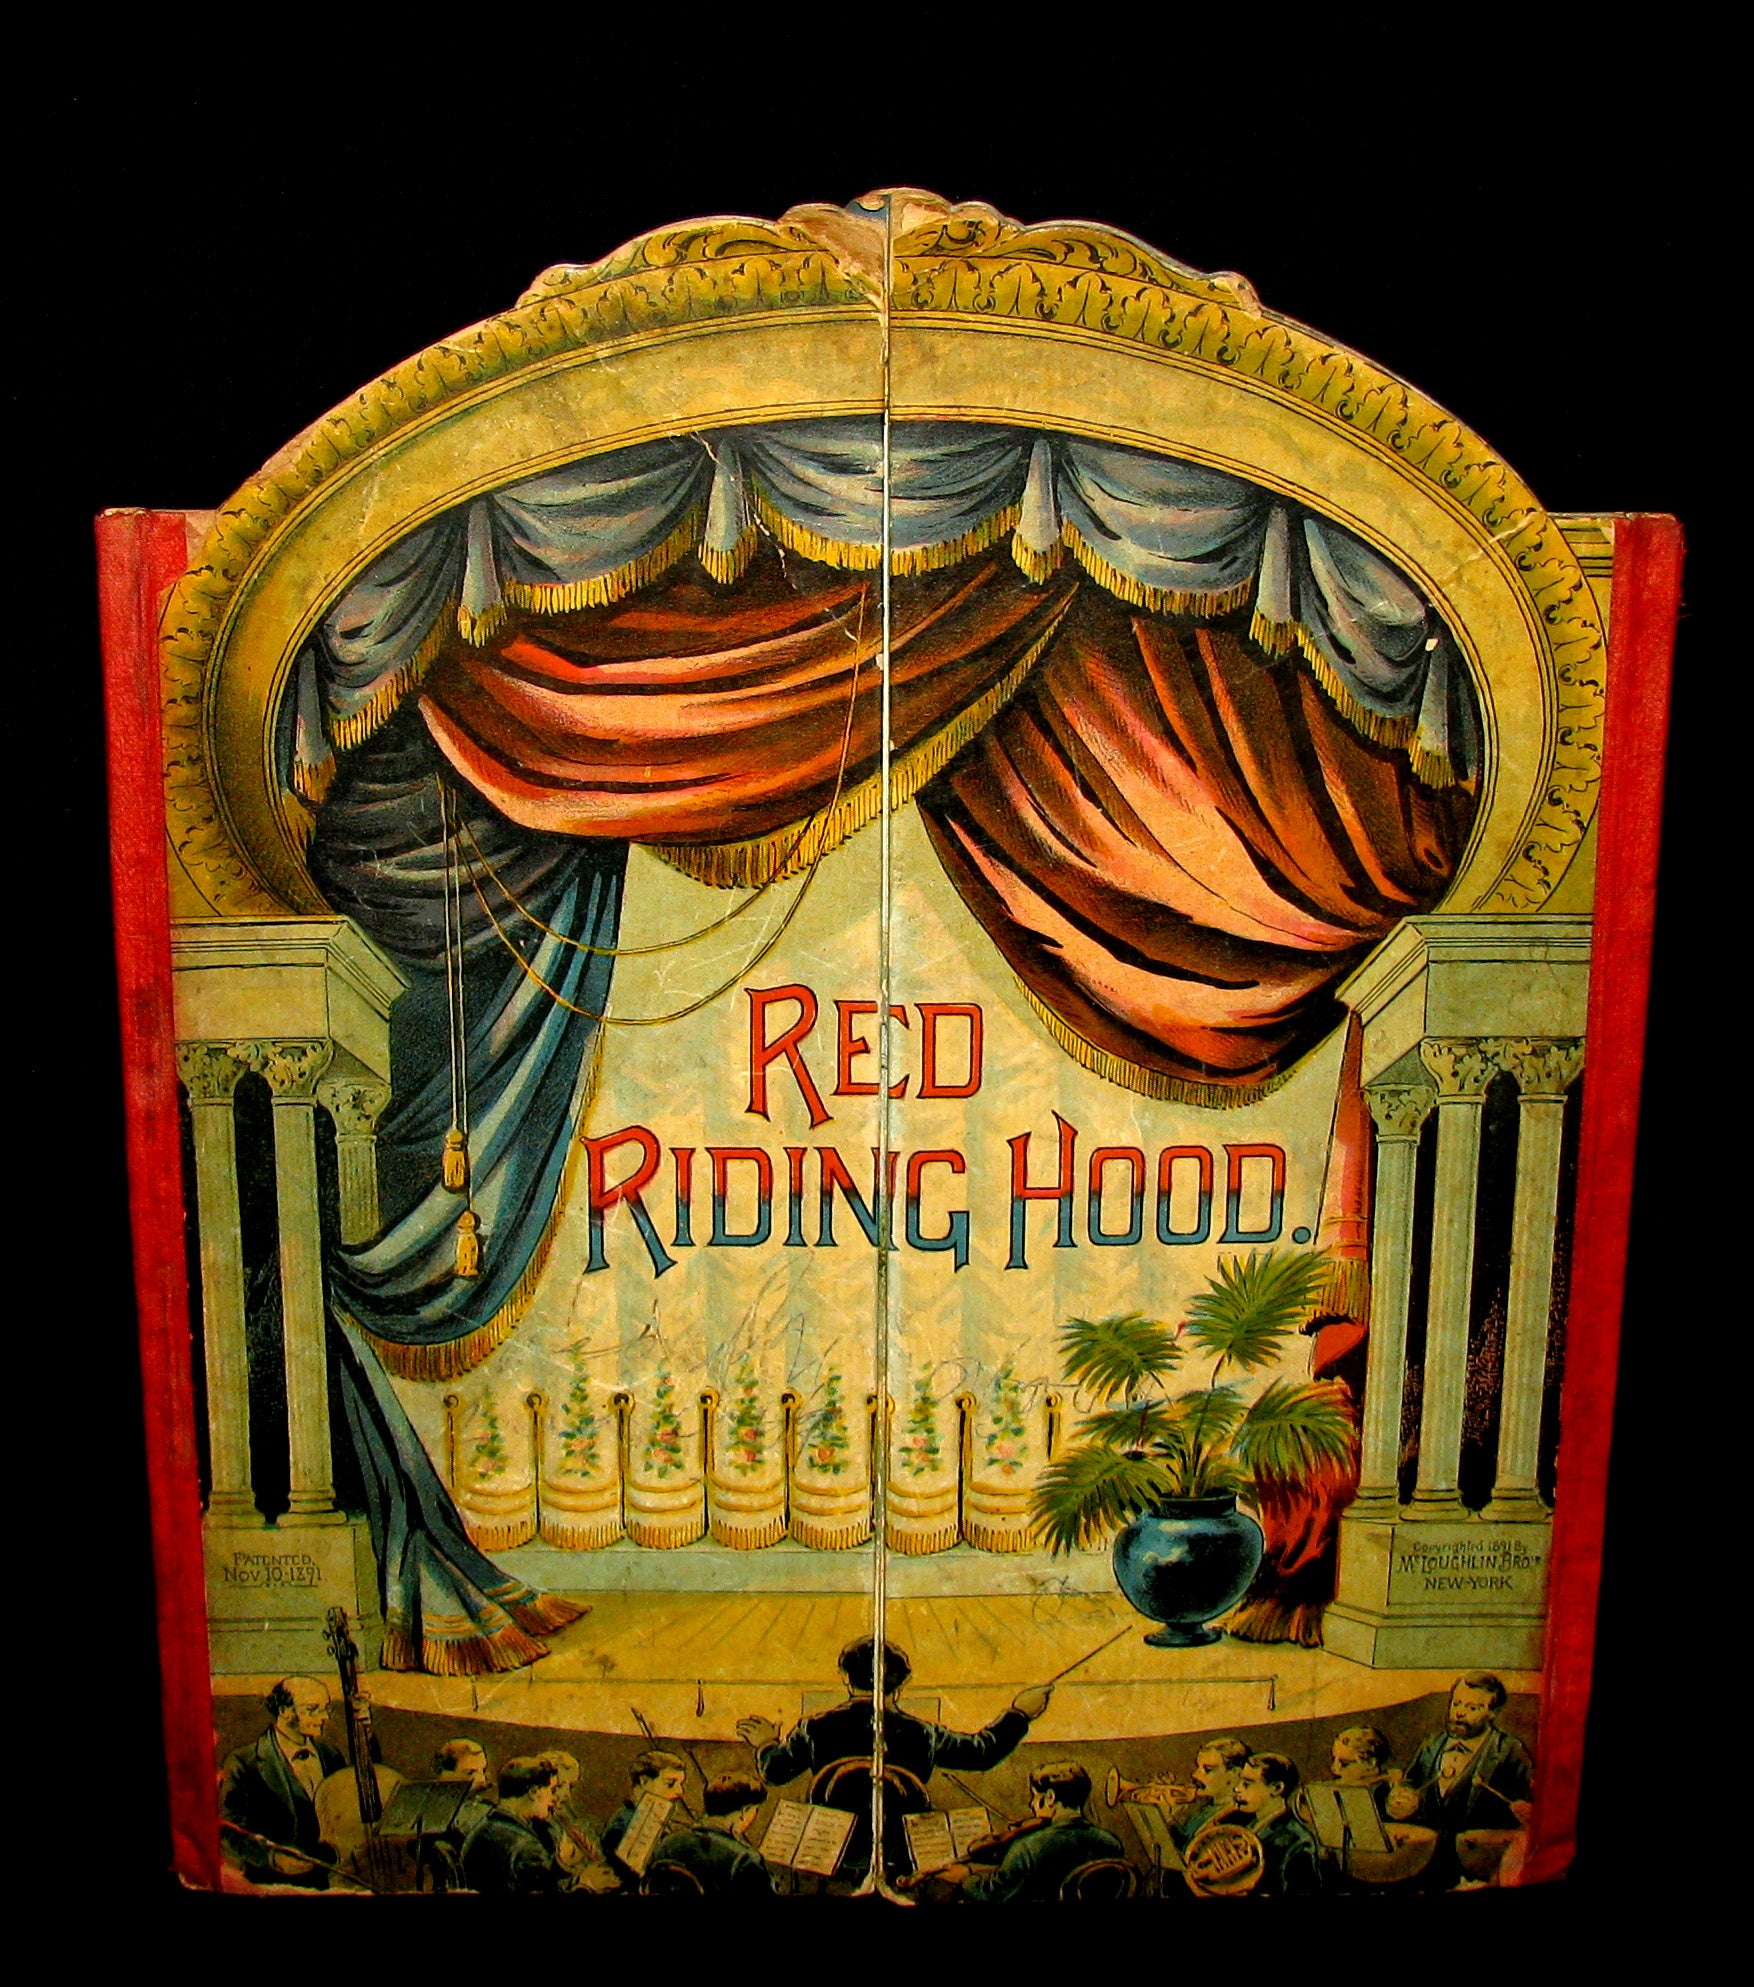 1891 Scarce Victorian Book - RED RIDING HOOD Theater Pantomime toy Book by McLoughlin.